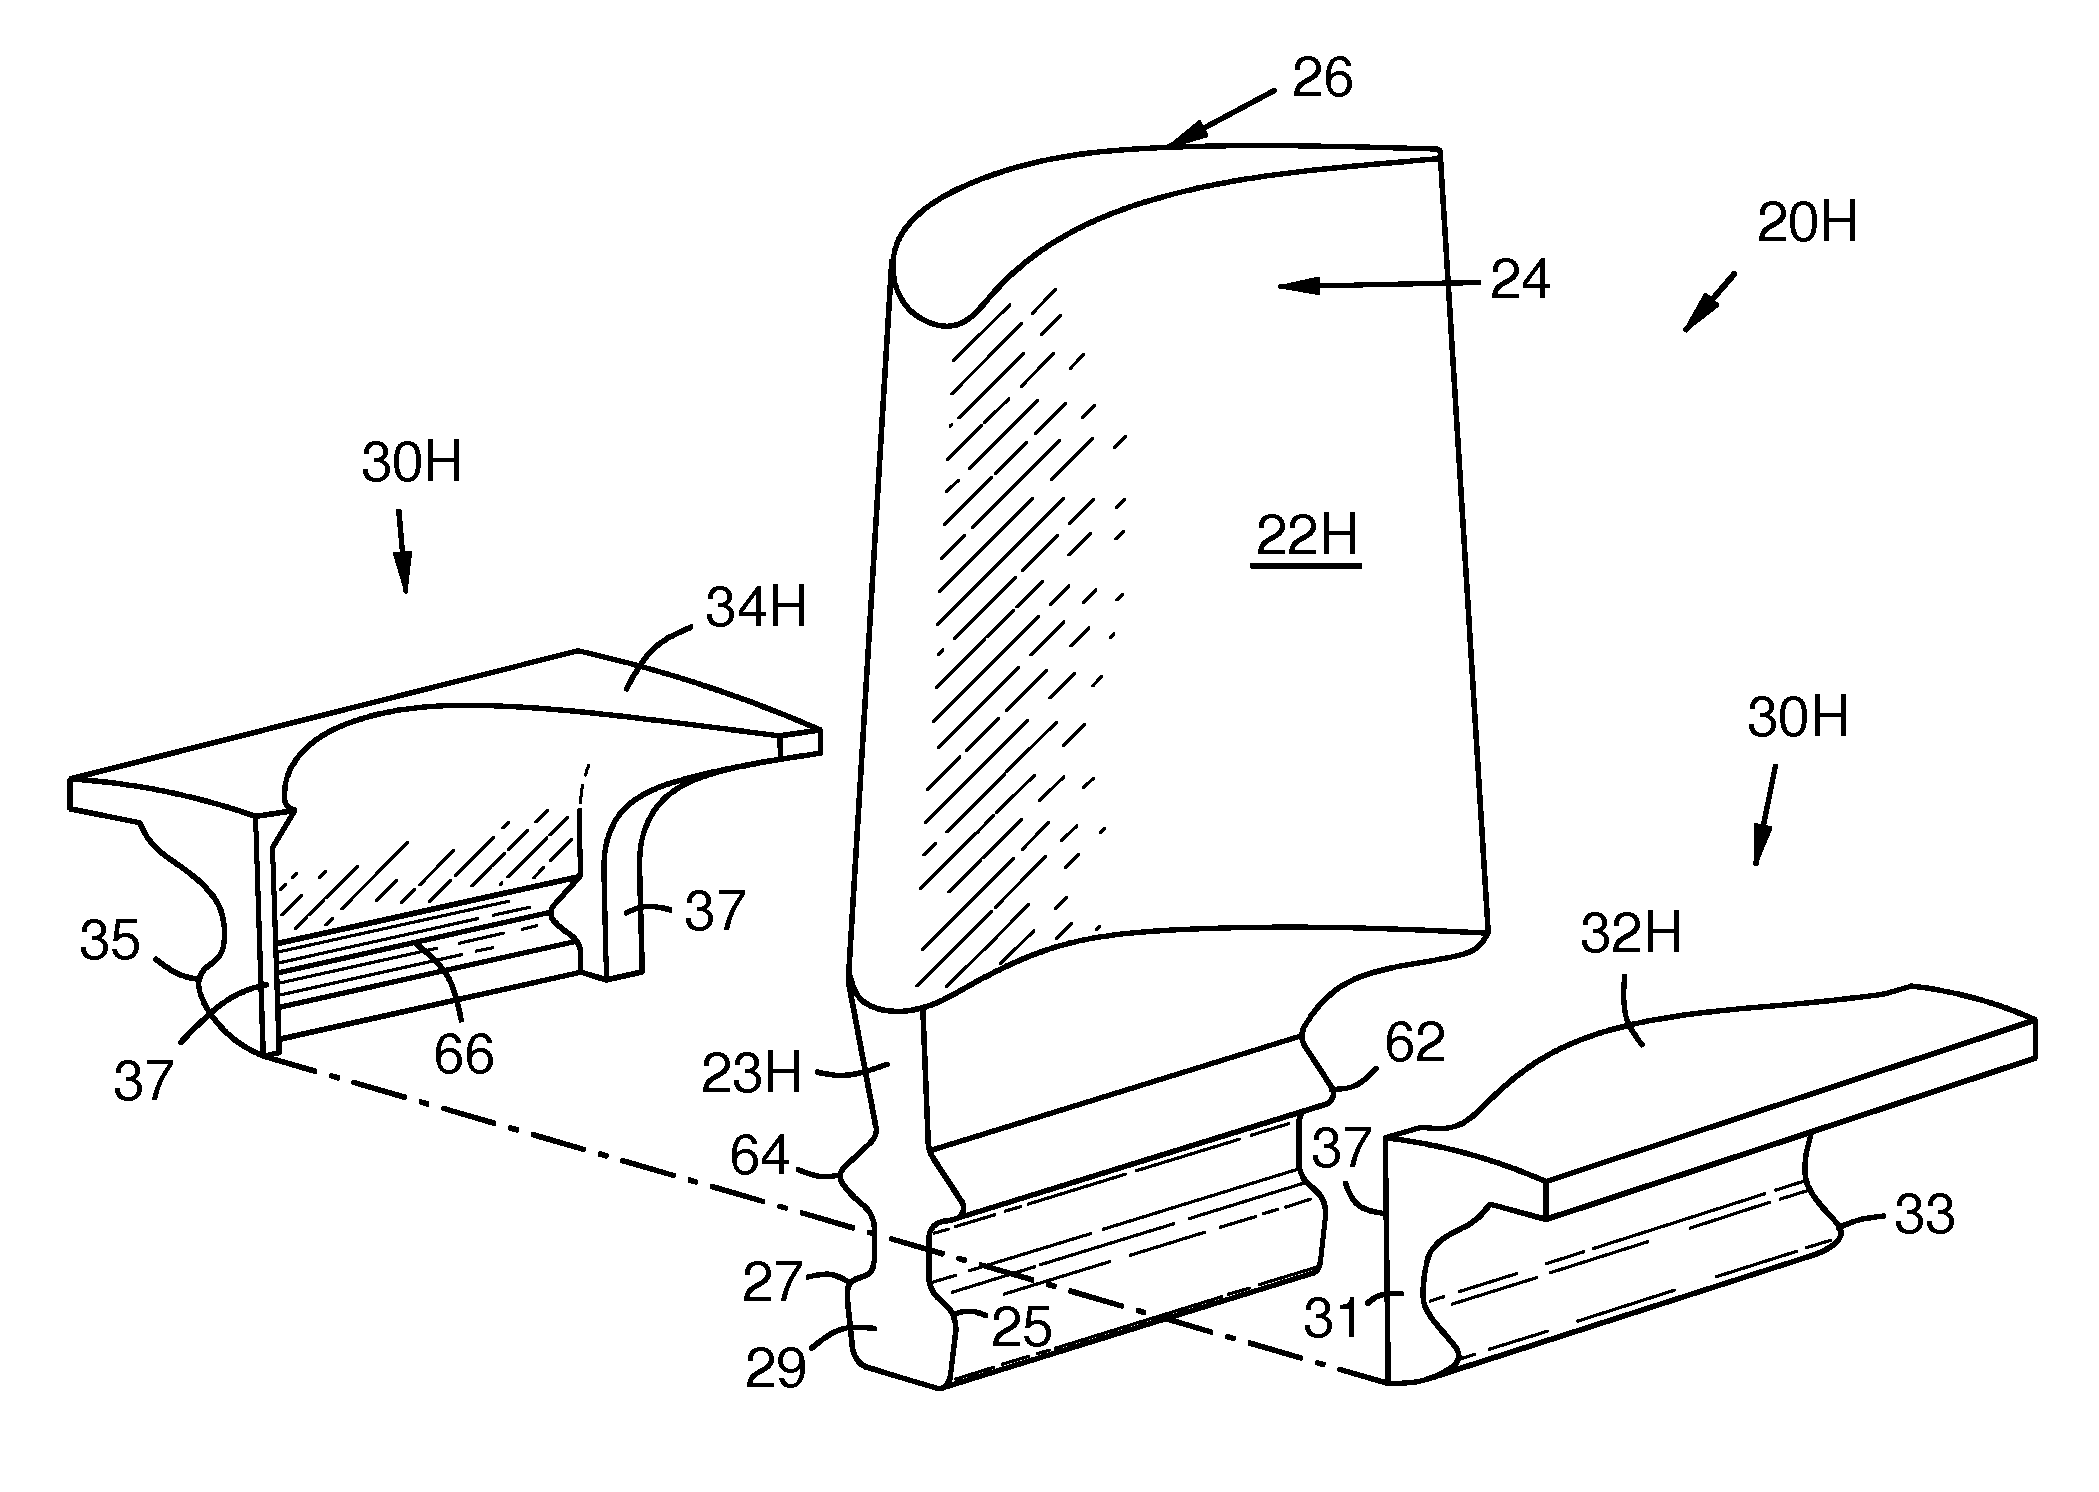 Modular turbine airfoil and platform assembly with independent root teeth